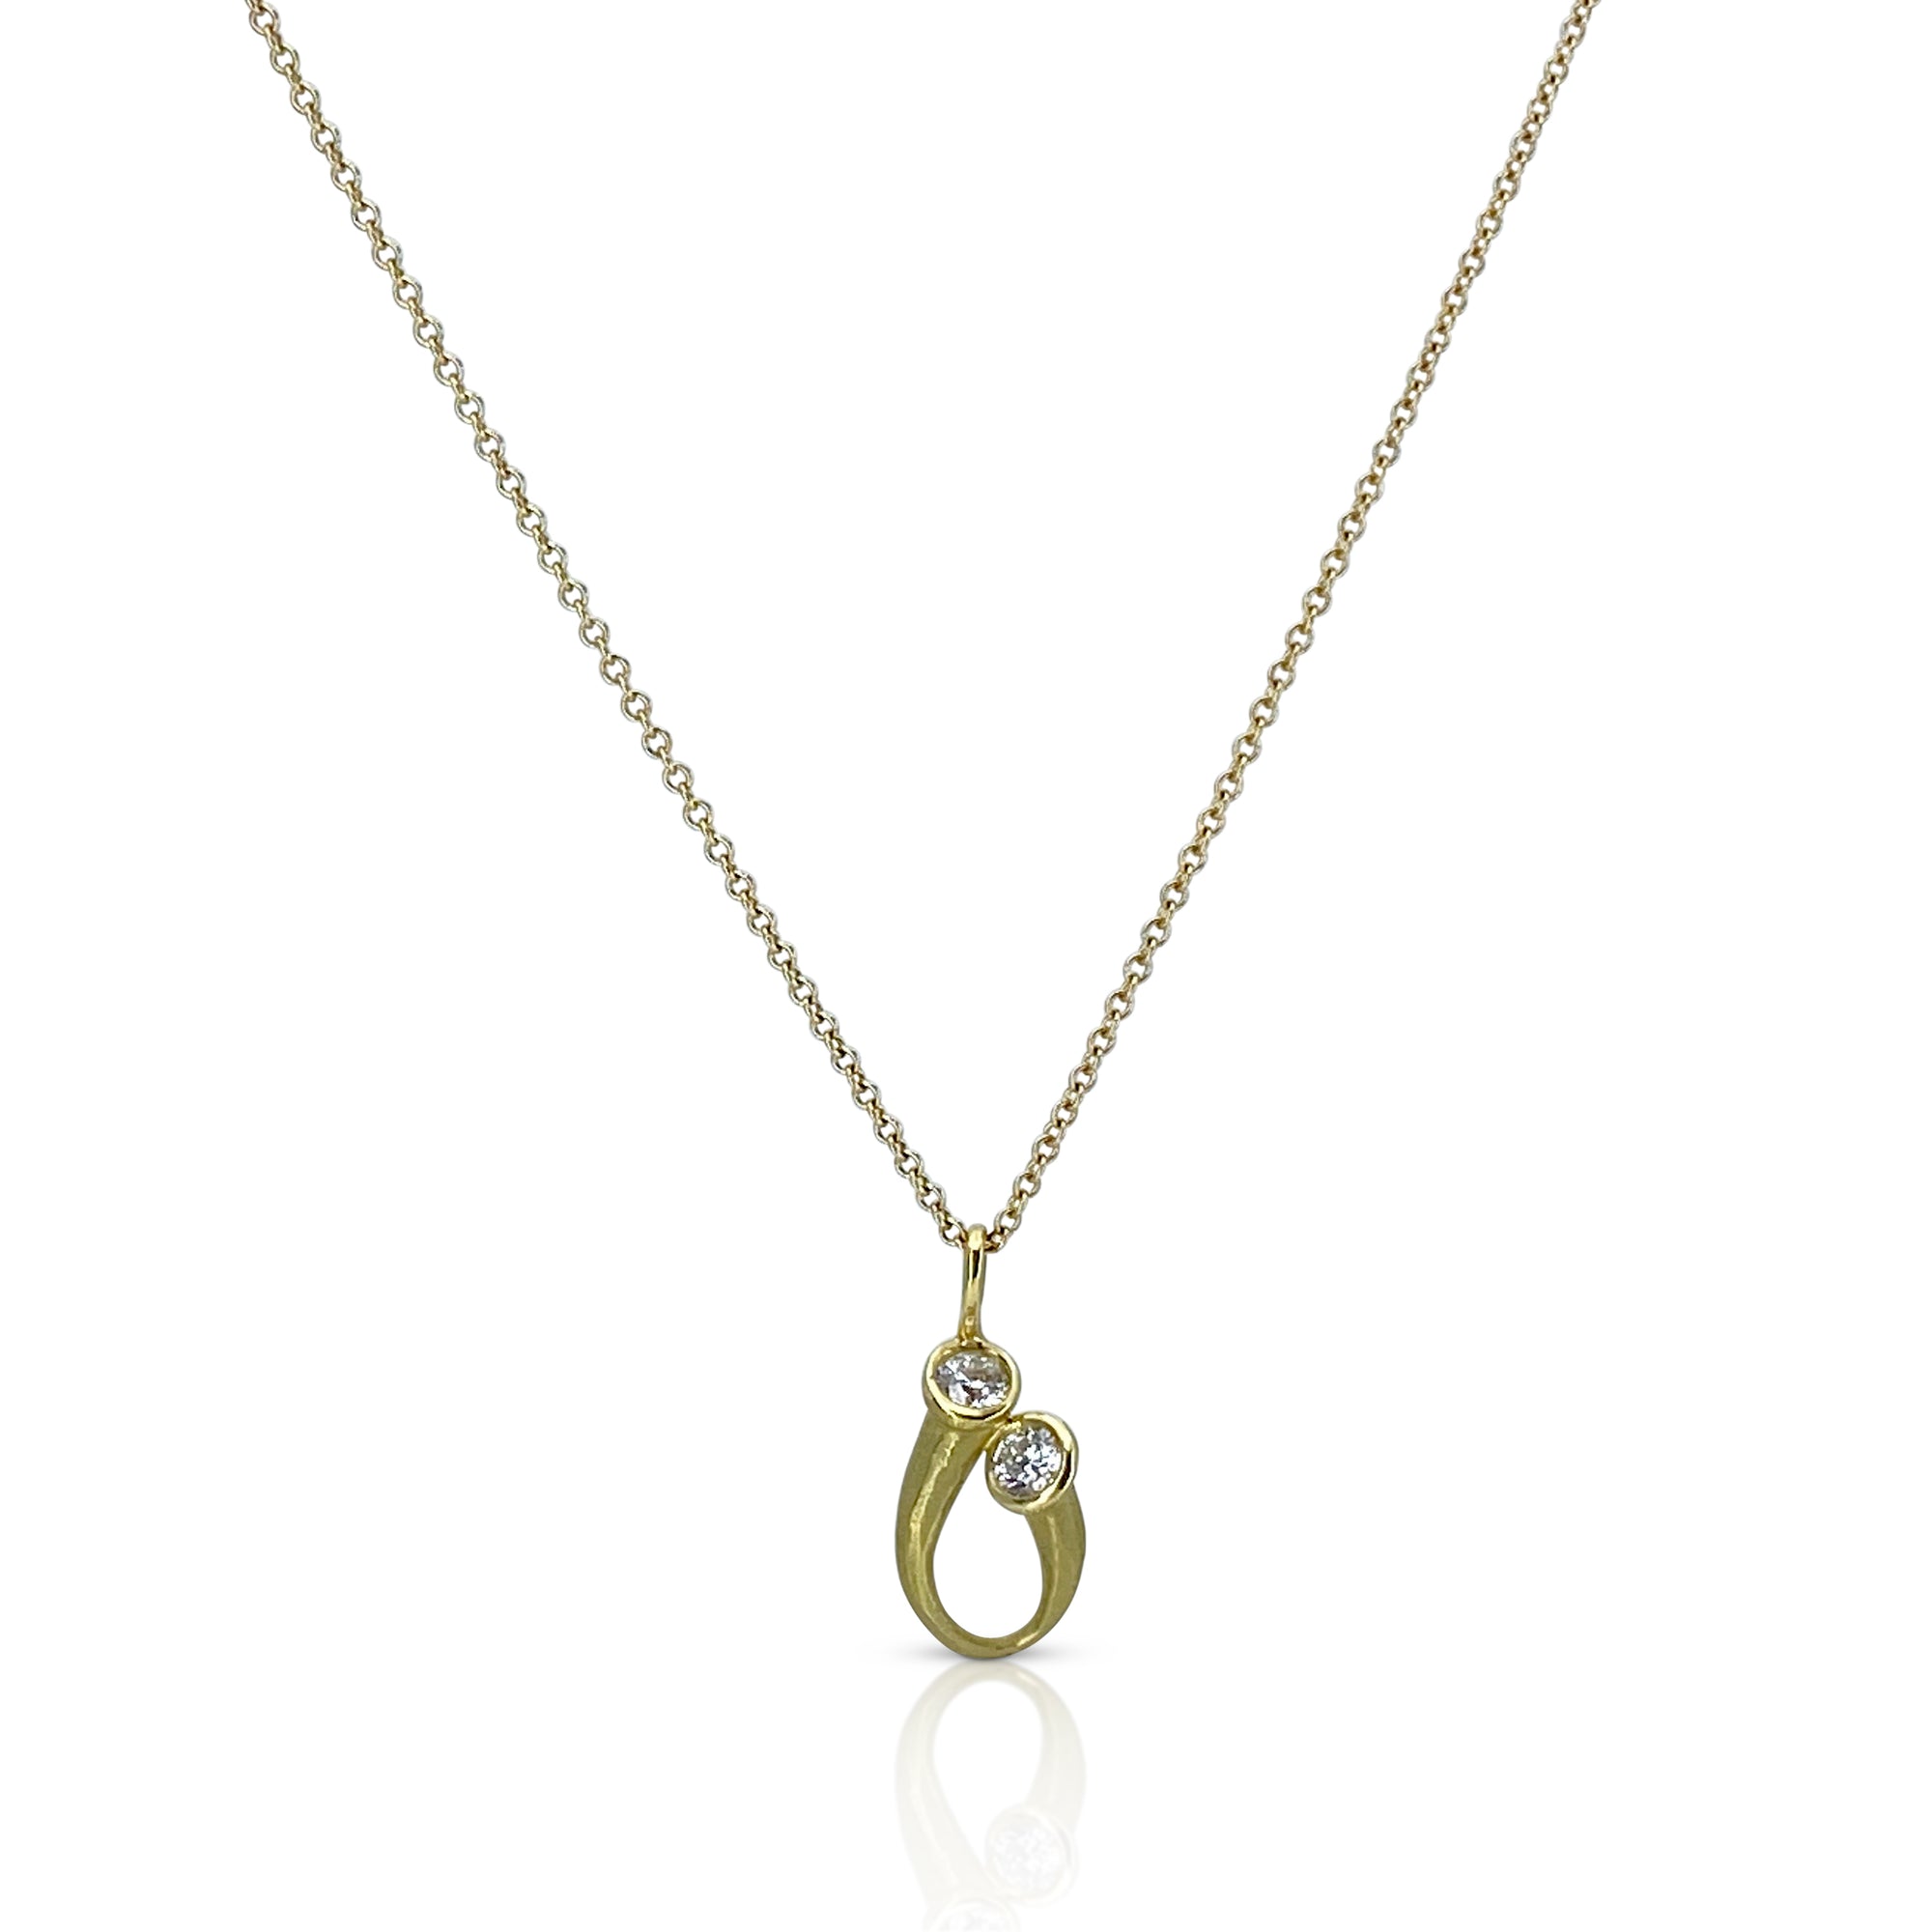 Delicate tear drop pendant in gold with round diamonds by Ayesha Mayadas